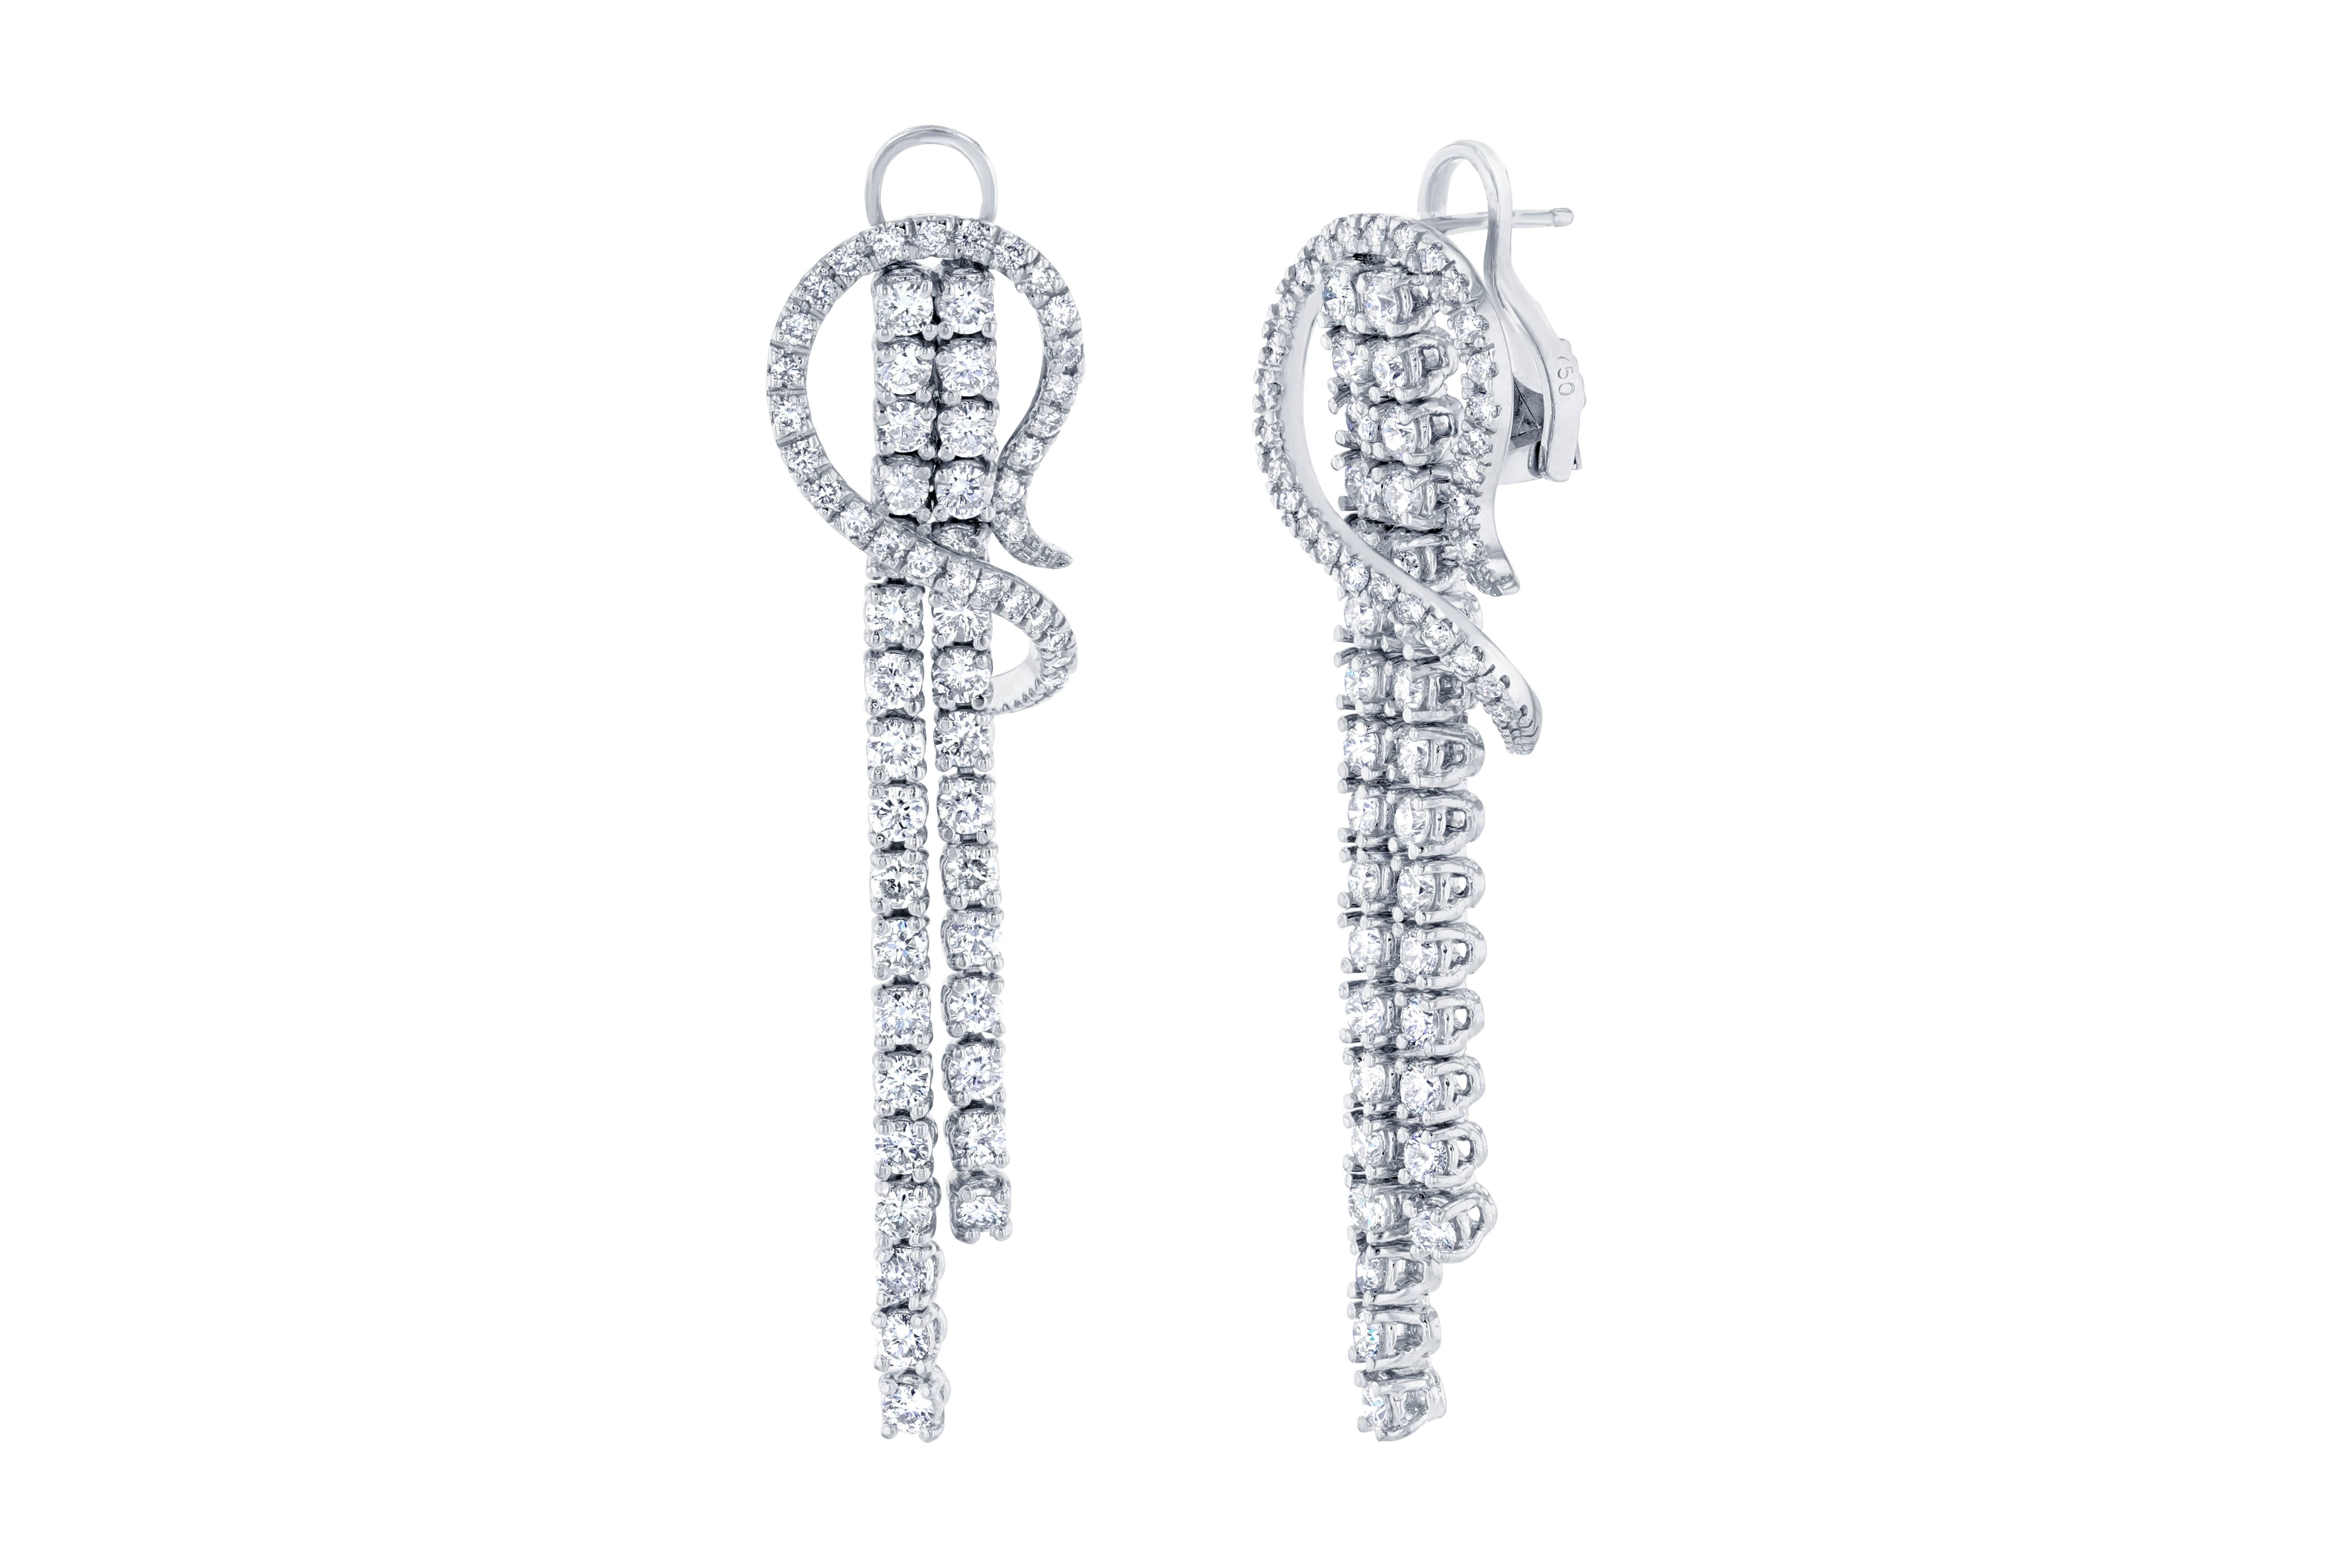 These are some gorgeous earrings that are sure to compliment everyone's wardrobe!  The earrings are designed to elevate your look and are sure to stir up lots of conversation.     There are 124 Round Cut Diamonds that weigh 4.75 carats.  Made in 14K